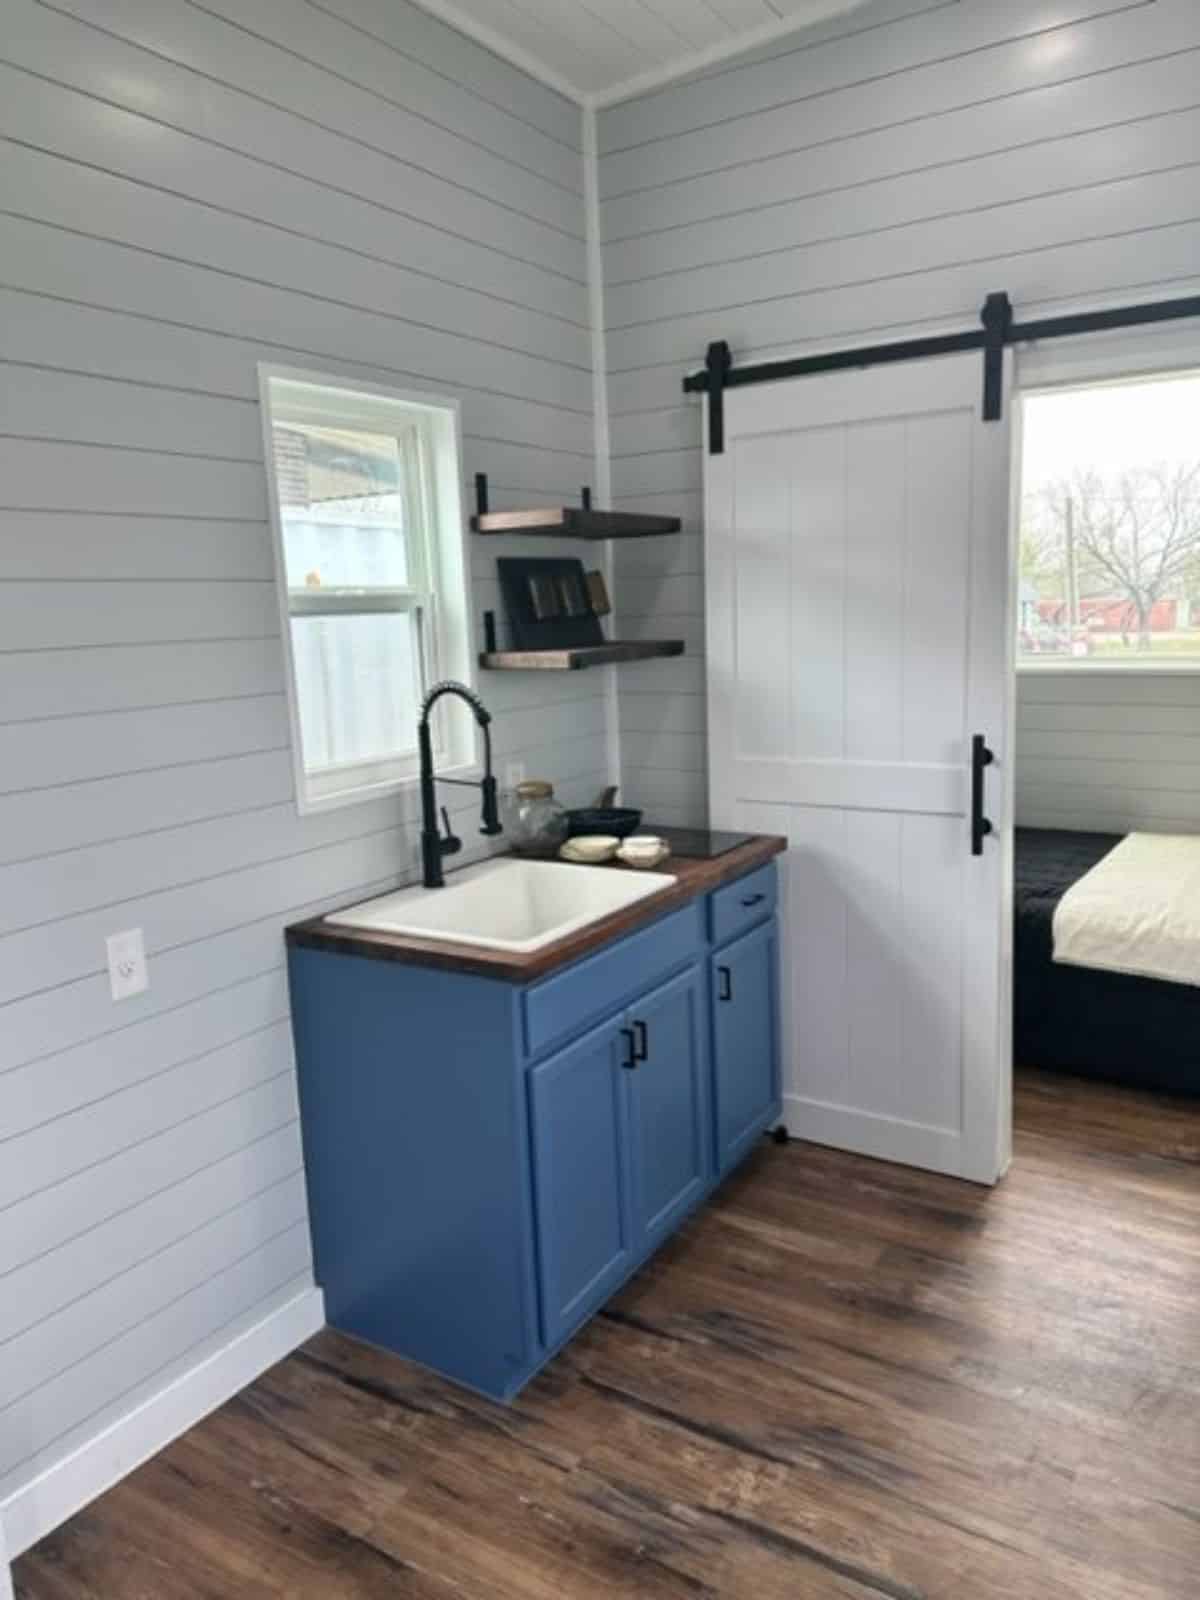 kitchen area of one bedroom tiny home is very compact but can be redesign with a big 1